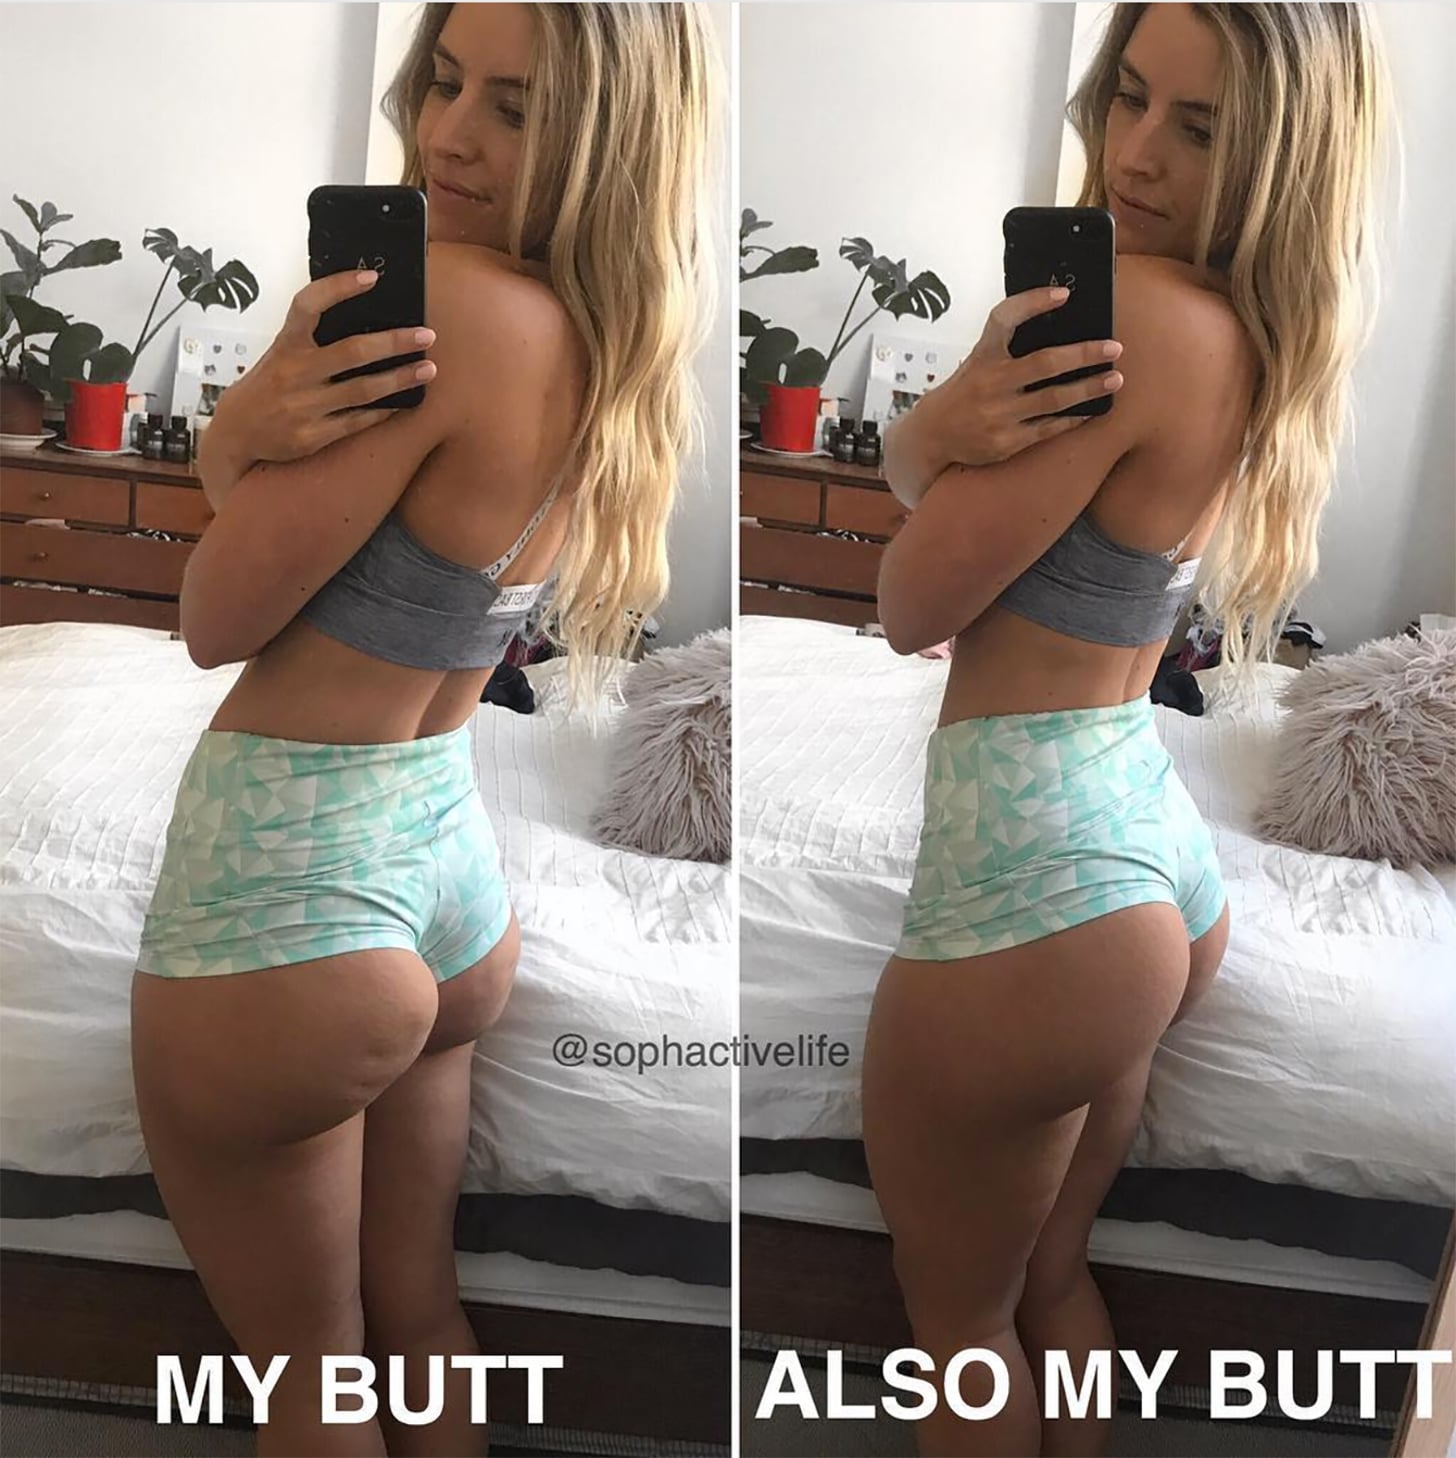 Cellulite On Butt Is Normal Popsugar Fitness 